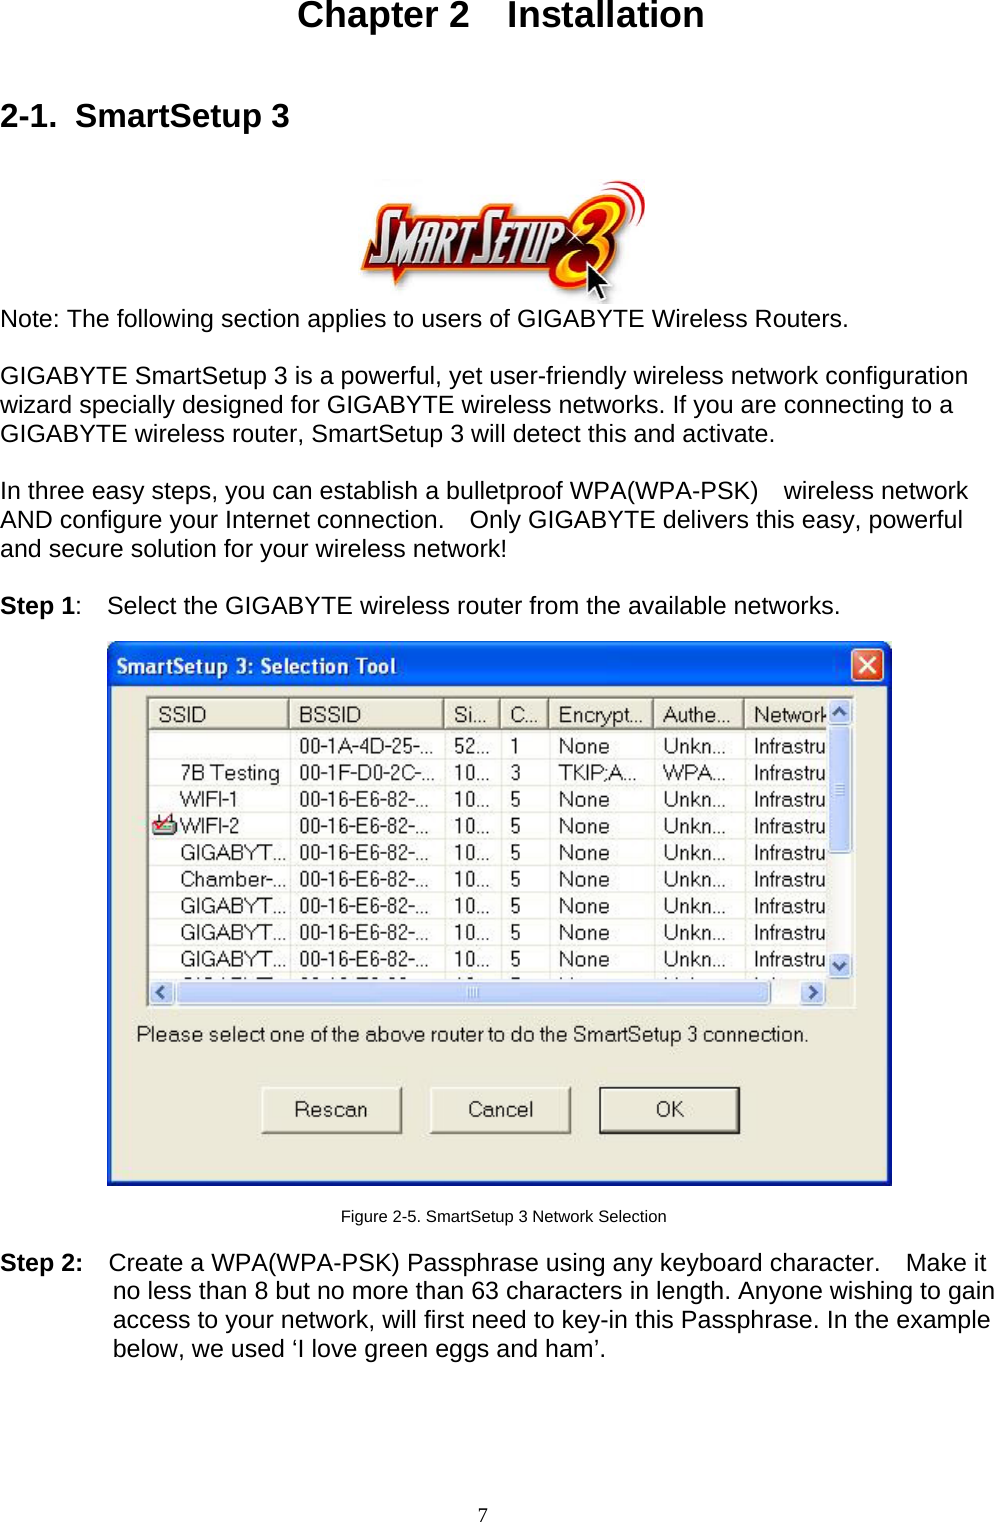 7    Chapter 2  Installation   2-1. SmartSetup 3    Note: The following section applies to users of GIGABYTE Wireless Routers.  GIGABYTE SmartSetup 3 is a powerful, yet user-friendly wireless network configuration wizard specially designed for GIGABYTE wireless networks. If you are connecting to a GIGABYTE wireless router, SmartSetup 3 will detect this and activate.      In three easy steps, you can establish a bulletproof WPA(WPA-PSK)  wireless network AND configure your Internet connection.    Only GIGABYTE delivers this easy, powerful and secure solution for your wireless network!  Step 1:    Select the GIGABYTE wireless router from the available networks.    Figure 2-5. SmartSetup 3 Network Selection  Step 2:    Create a WPA(WPA-PSK) Passphrase using any keyboard character.    Make it no less than 8 but no more than 63 characters in length. Anyone wishing to gain access to your network, will first need to key-in this Passphrase. In the example below, we used ‘I love green eggs and ham’.  